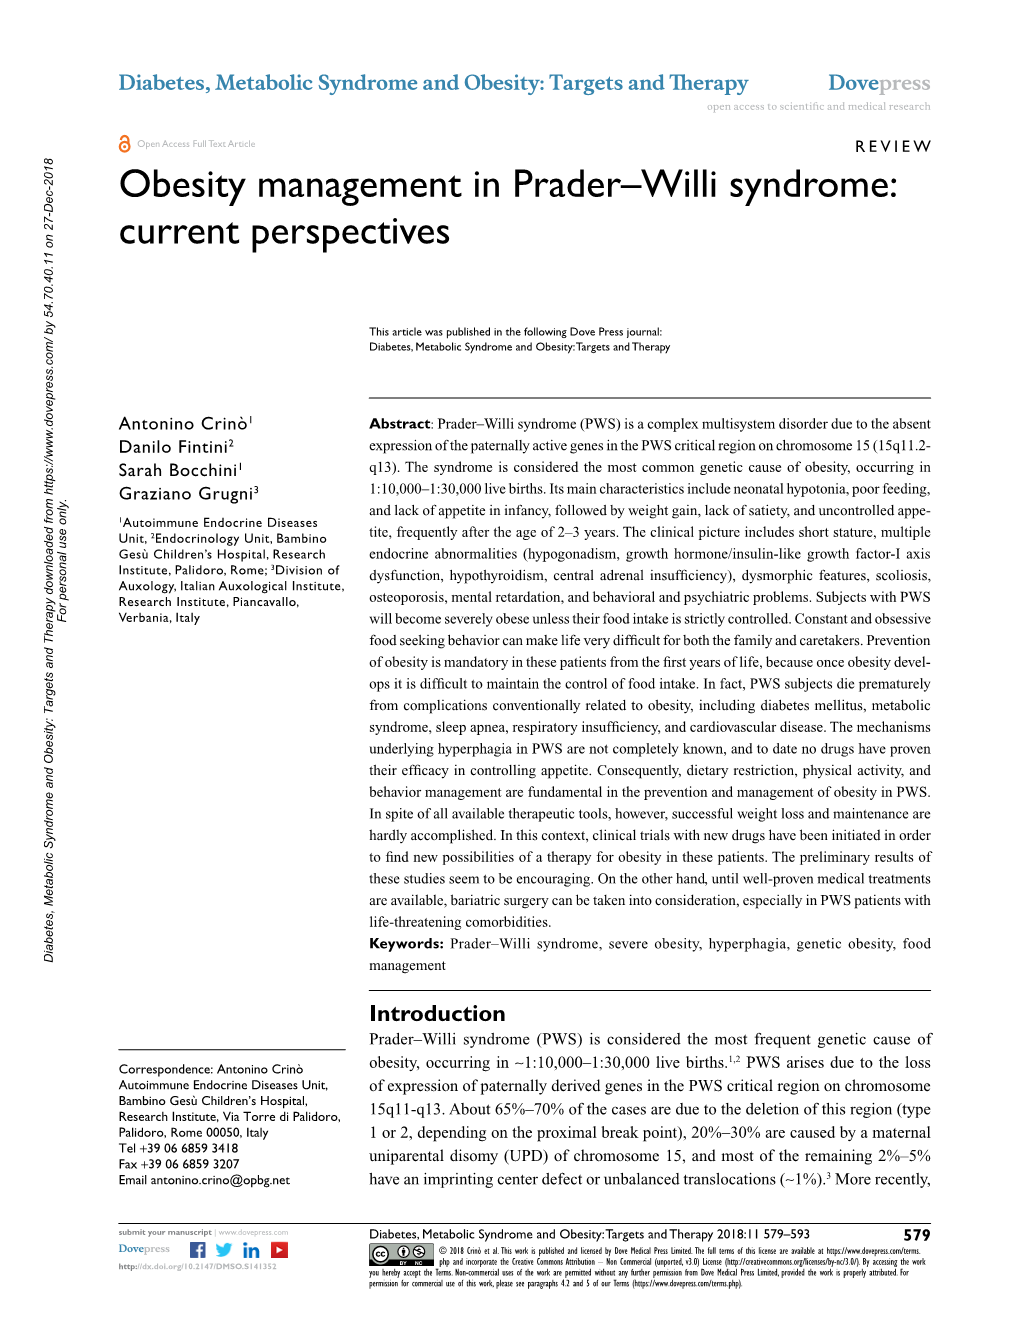 Obesity Management in Prader–Willi Syndrome Open Access to Scientific and Medical Research DOI